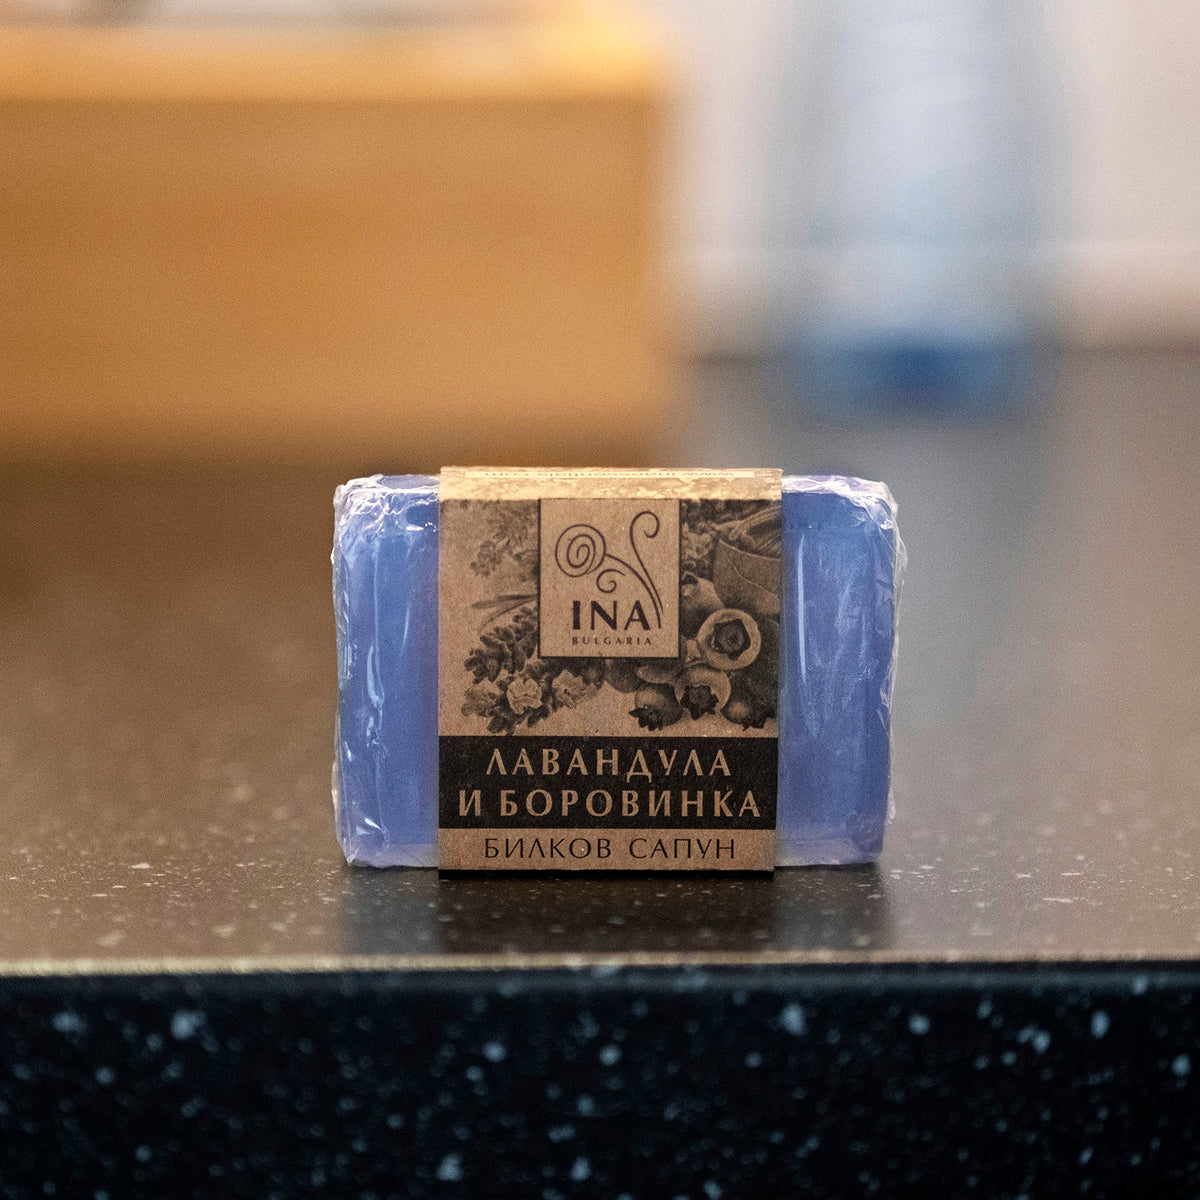 Natural Herbal Soap with Lavender and Blueberry - body Acne and Blemish-prone skin